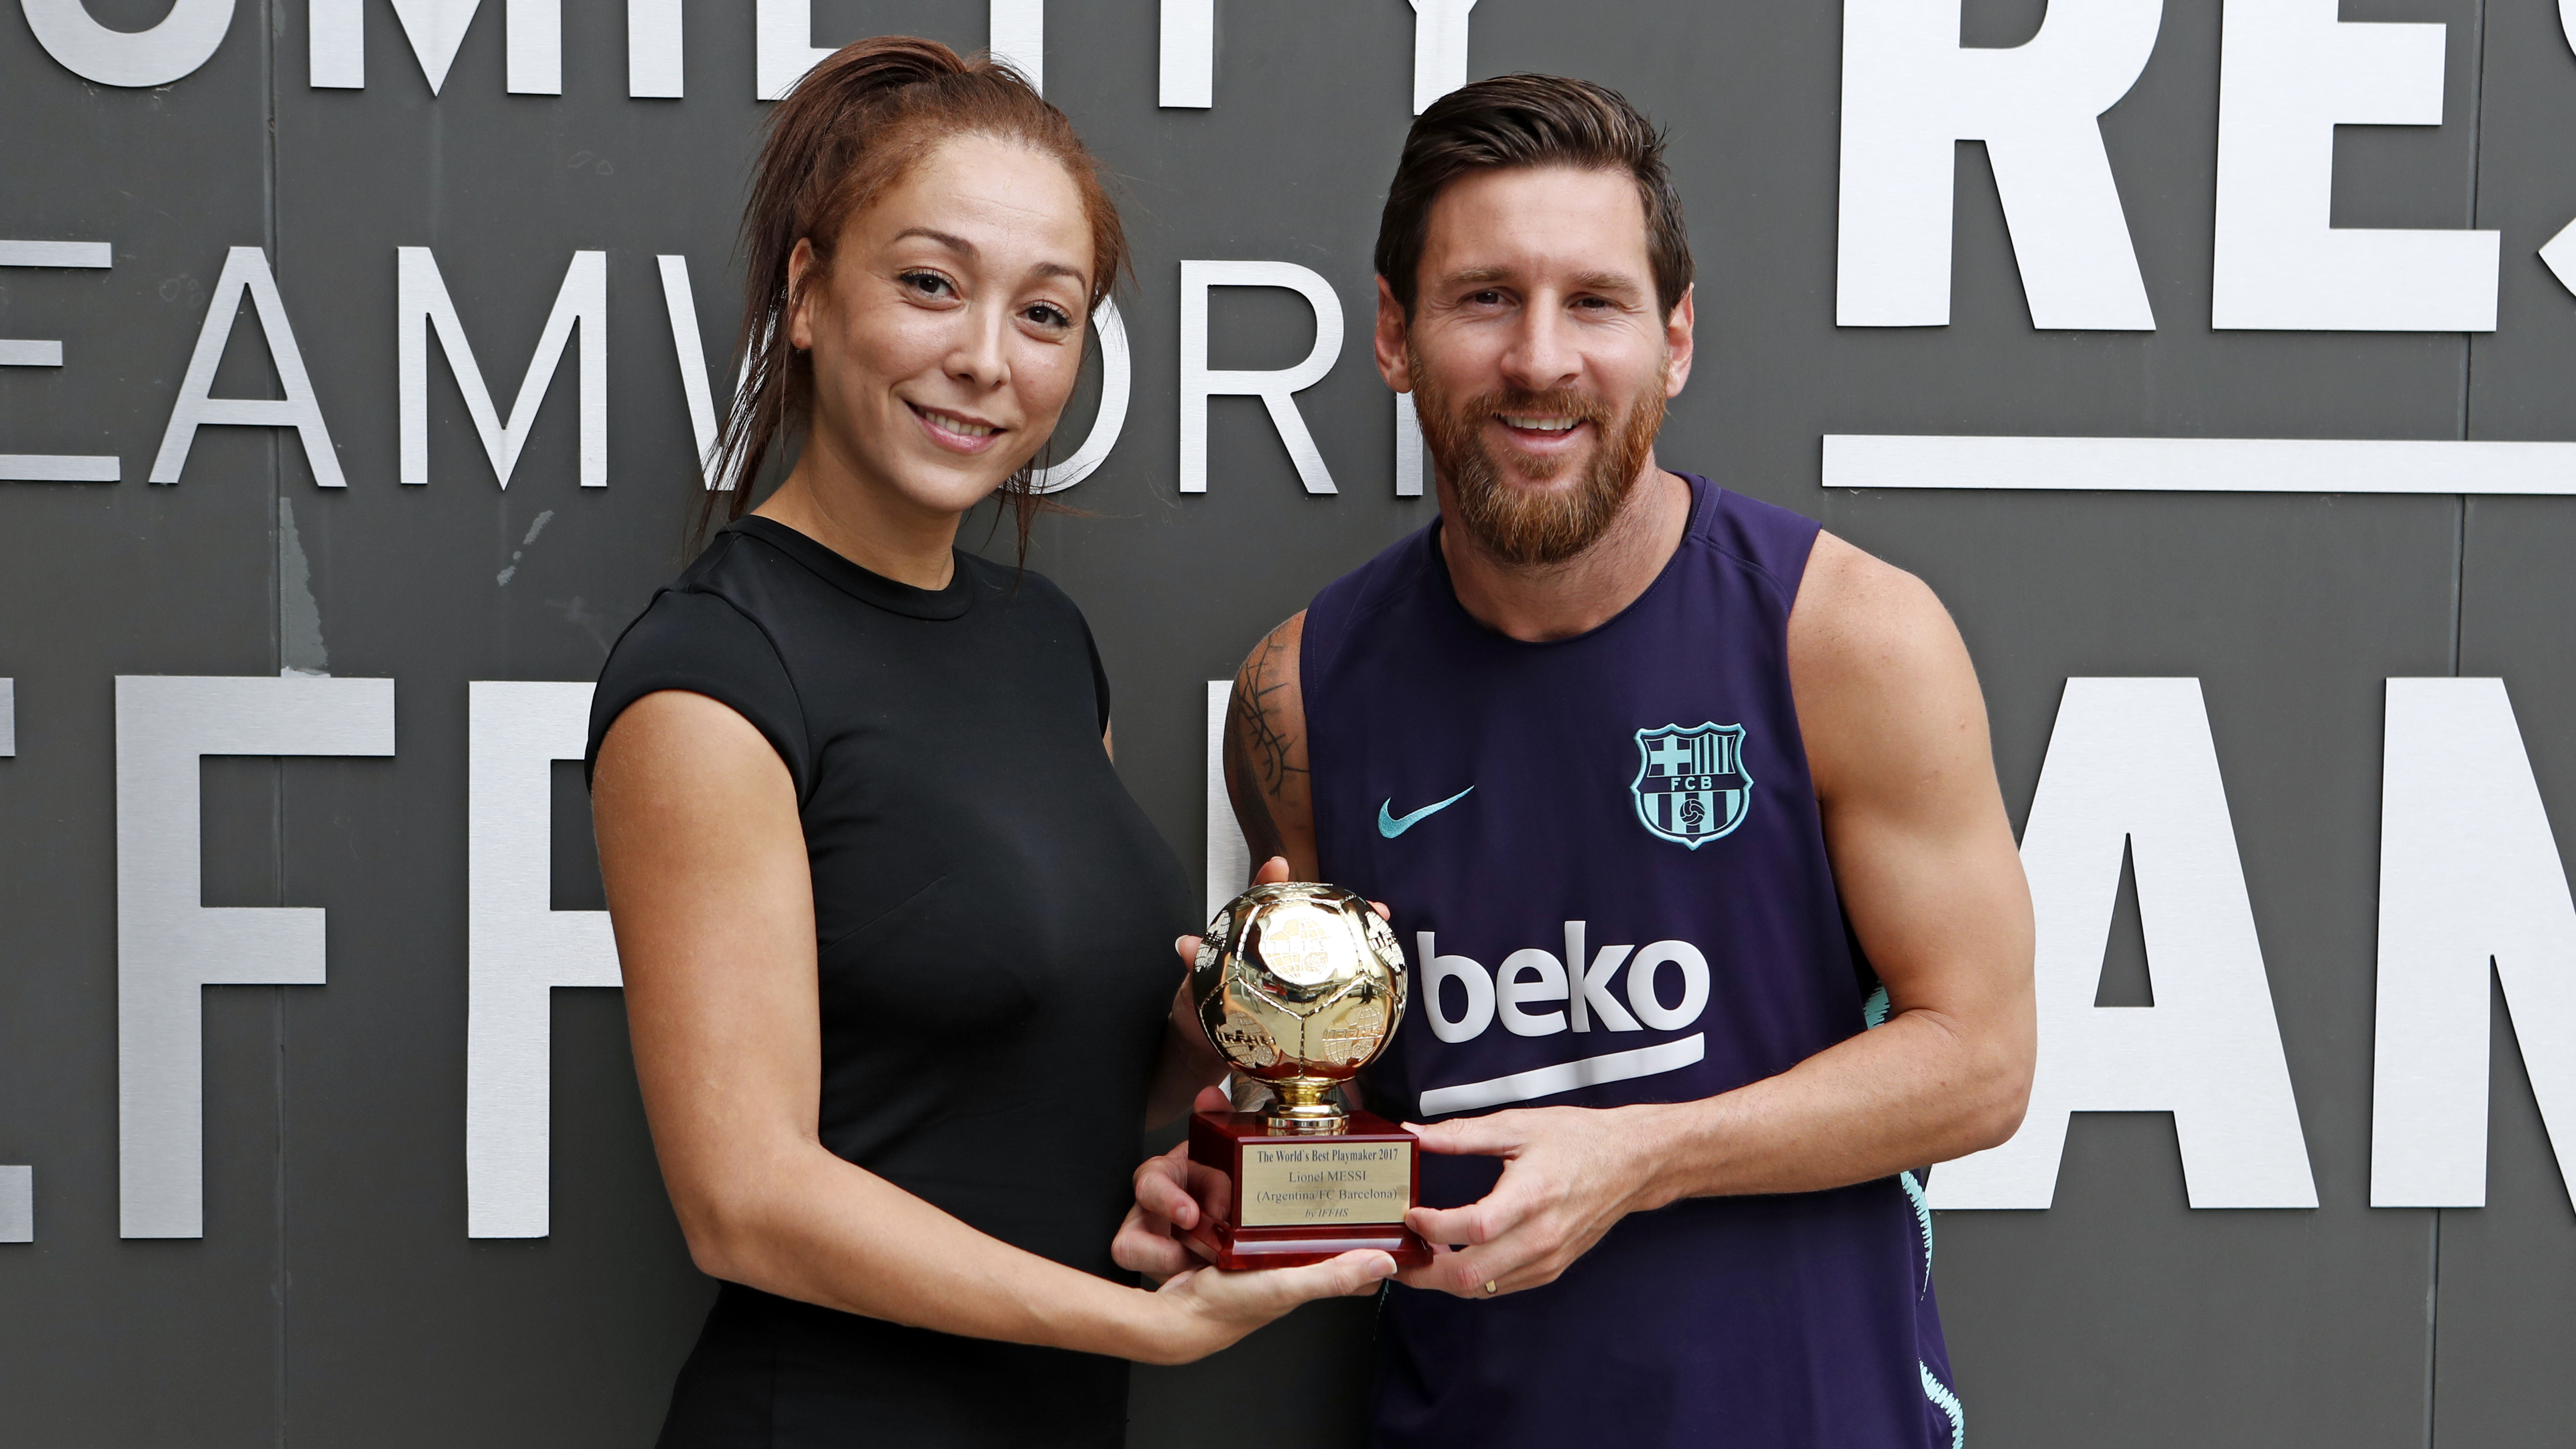 MessivsRonaldo.app on X: 4️⃣ IFFHS 📈 One of the IFFHS's countless annual  awards is for the Strongest League in the World, for which they produce a  full set of global league rankings.